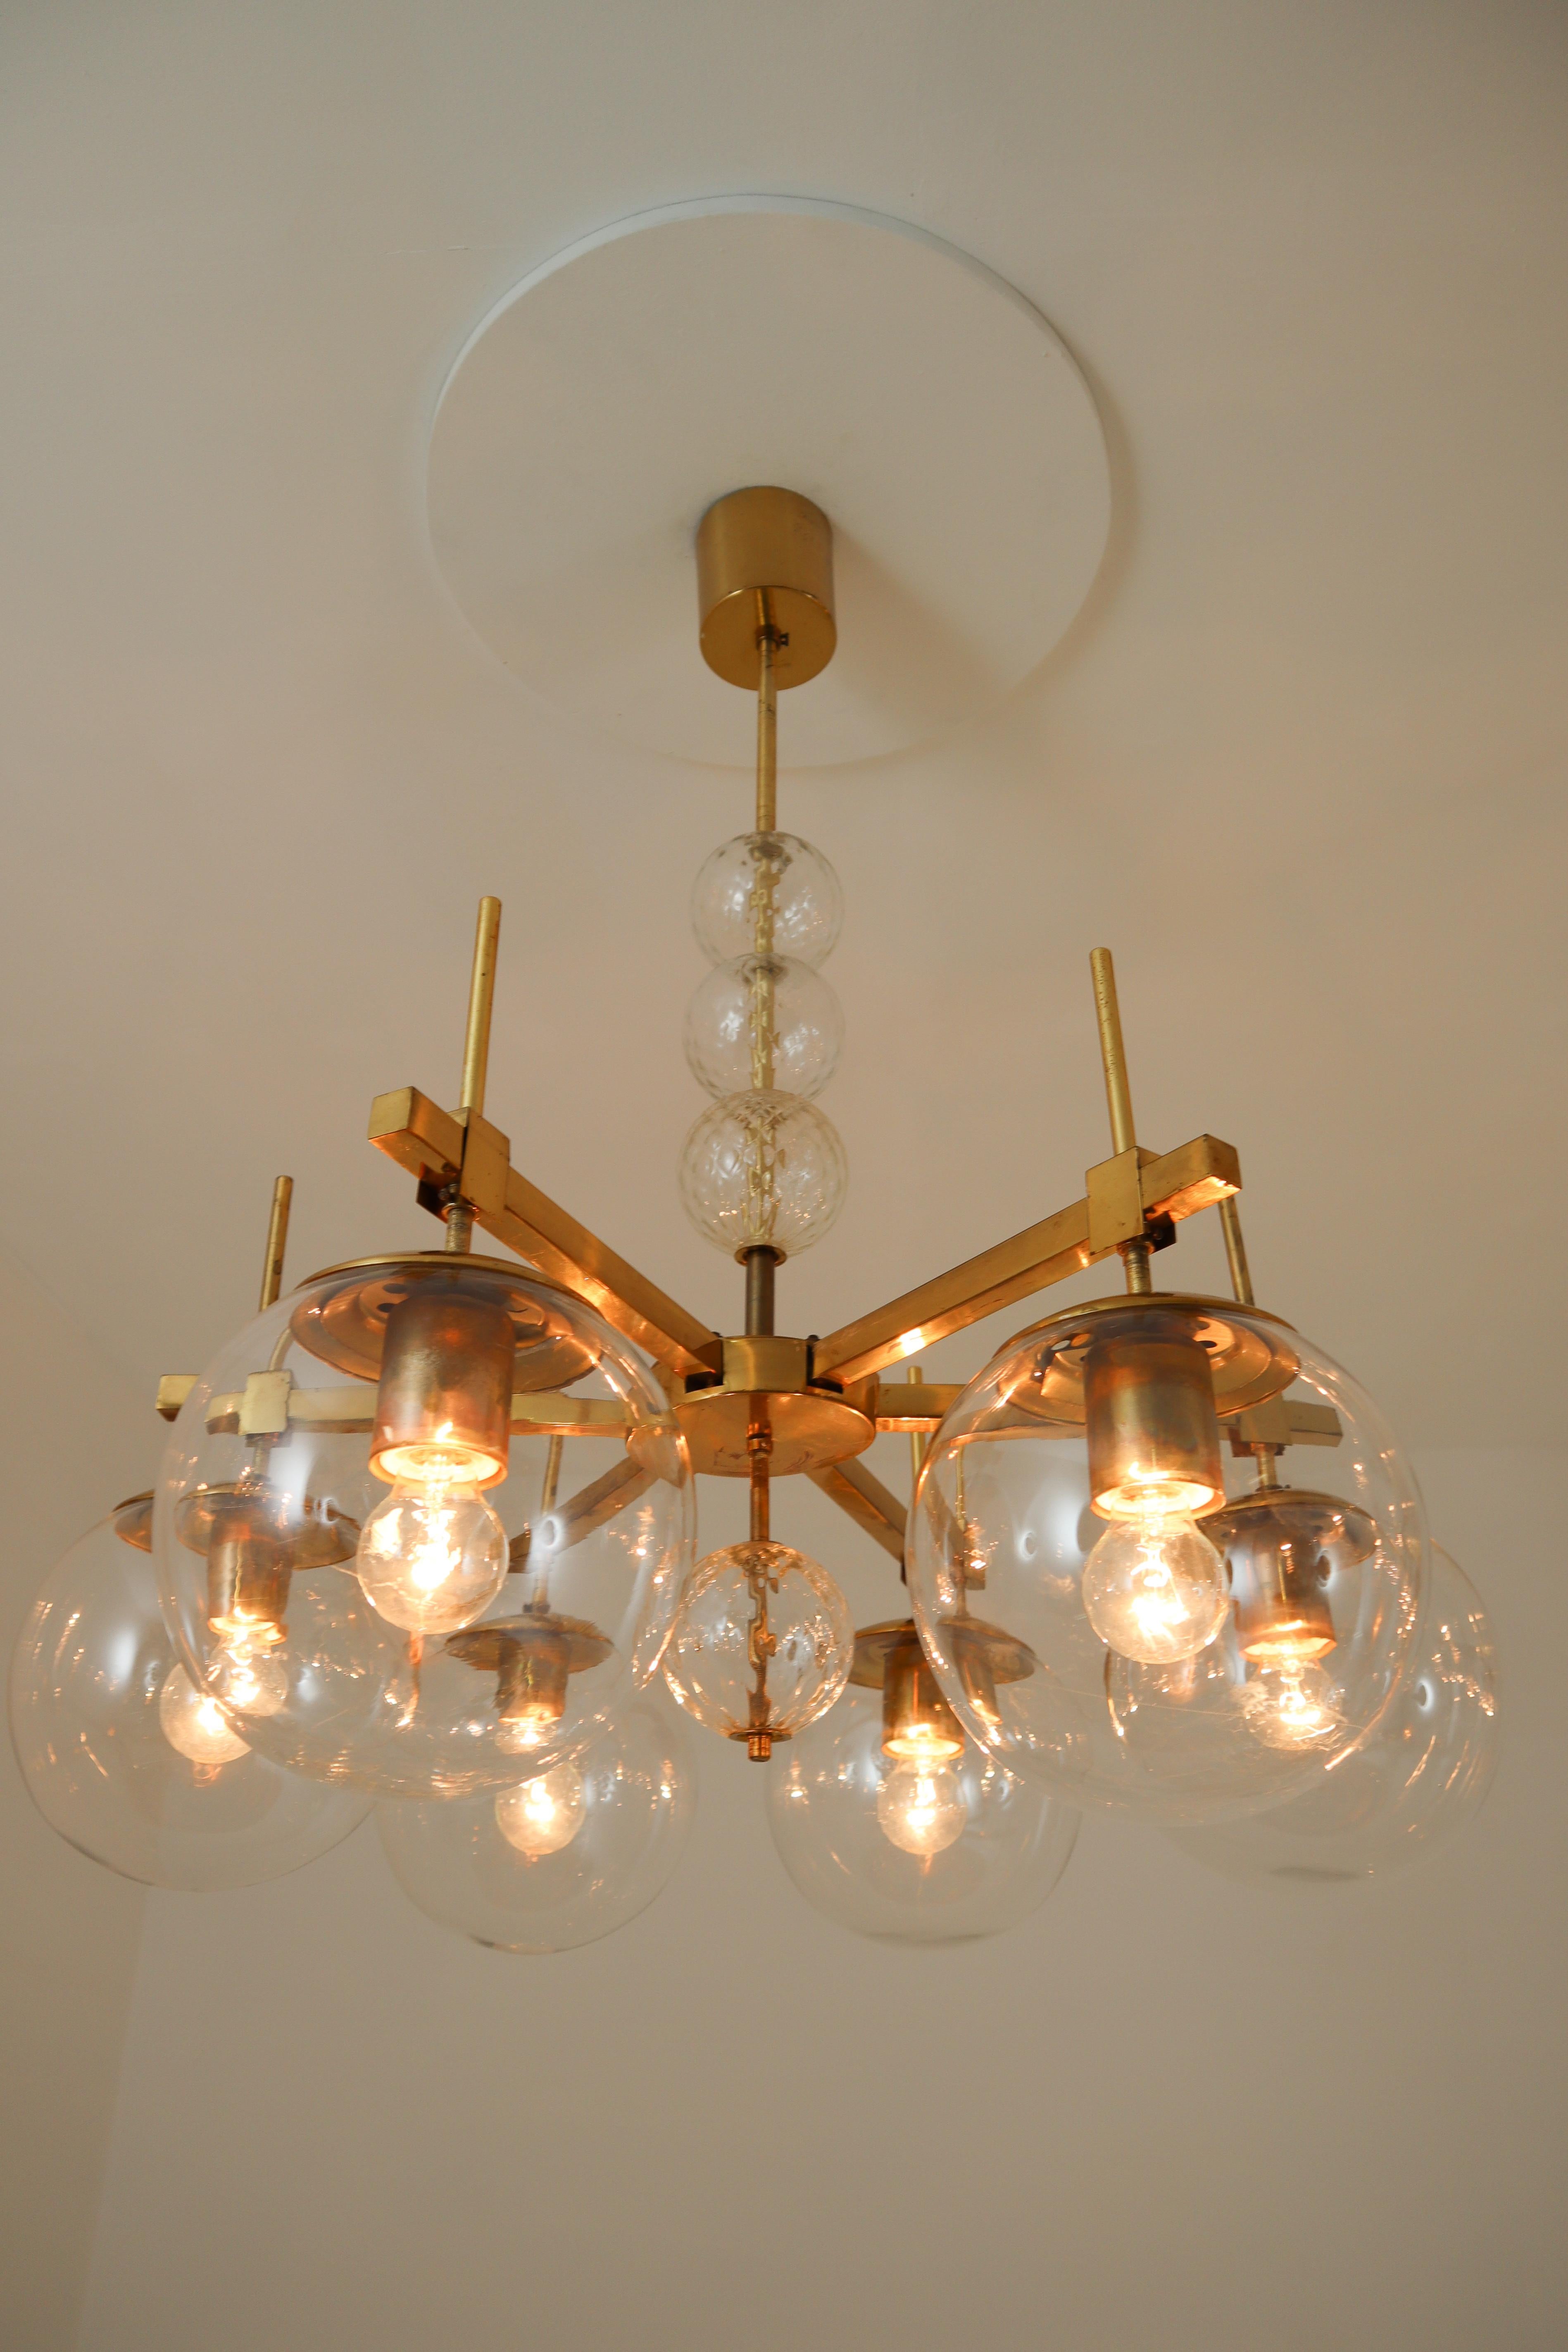 Large set of six brass chandeliers was produced in Europe in the 1960s. A spirited and chic design set chandeliers with brass fixture and handblown glass. The chandelier with brass frame consist of six lights, formed in a circle, with glass shades.